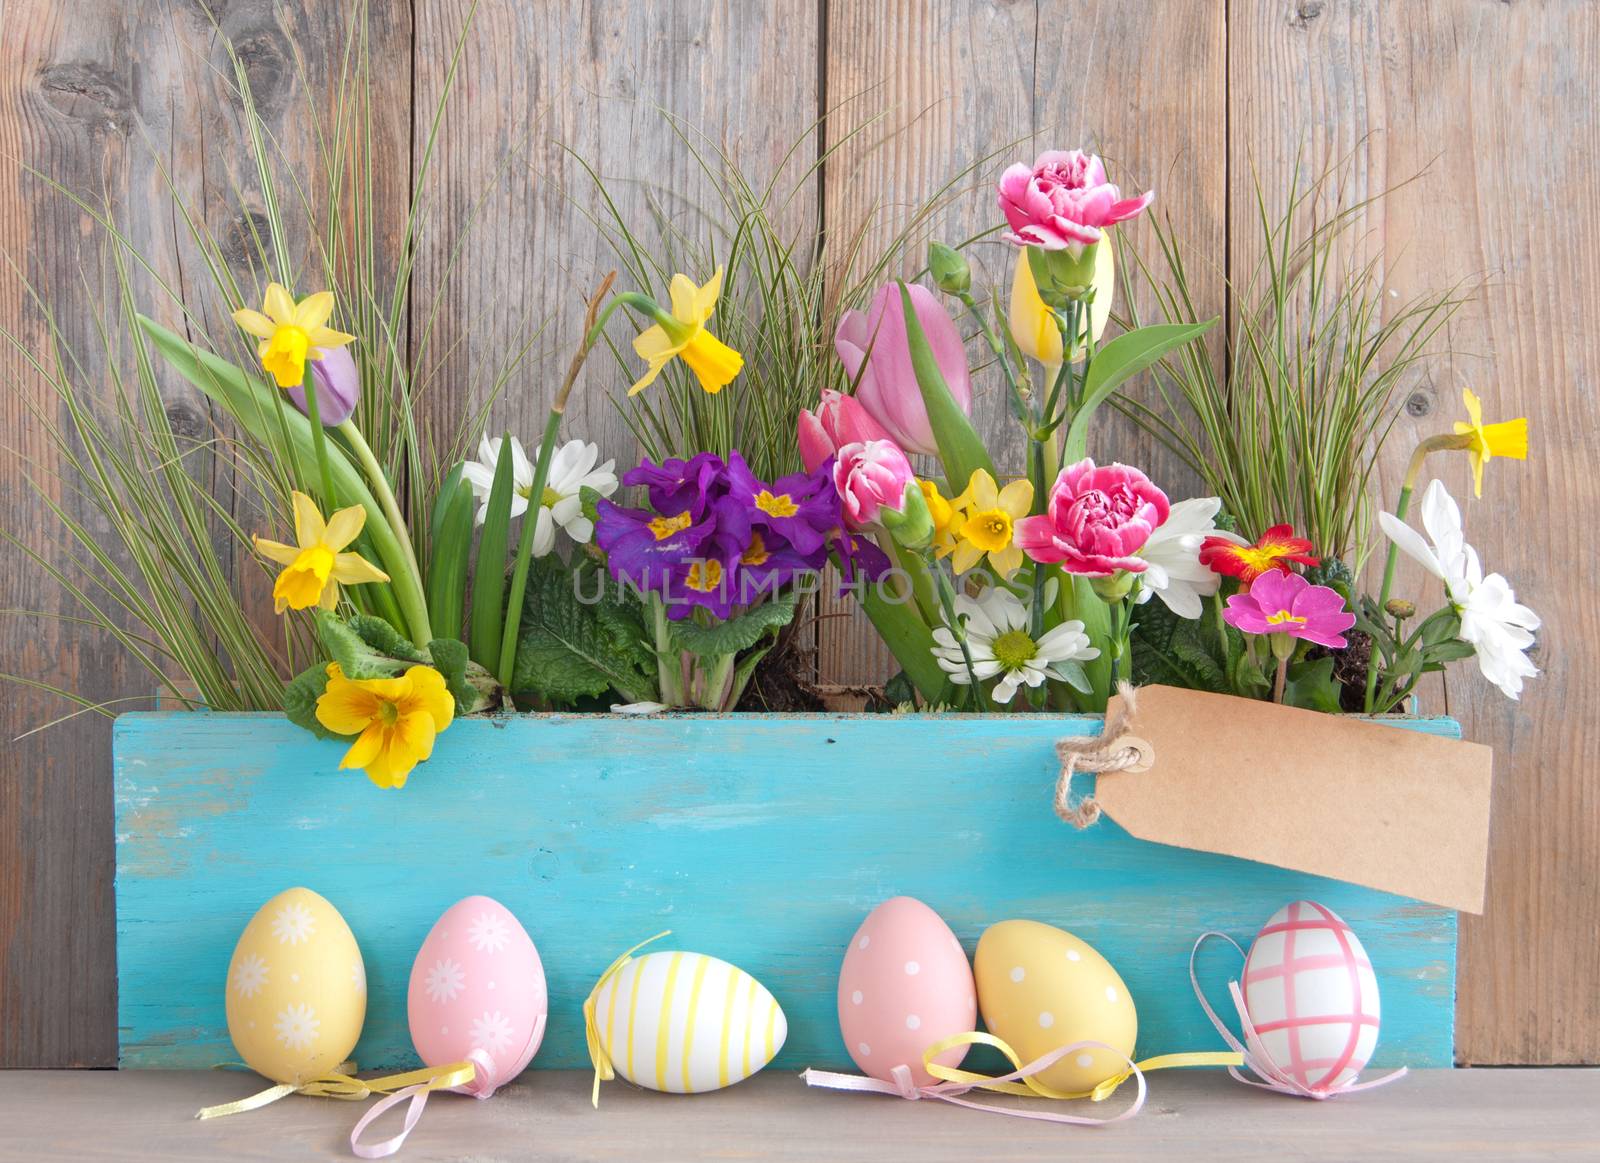 Spring flowers in a wooden pot with row of easter eggs and blank label